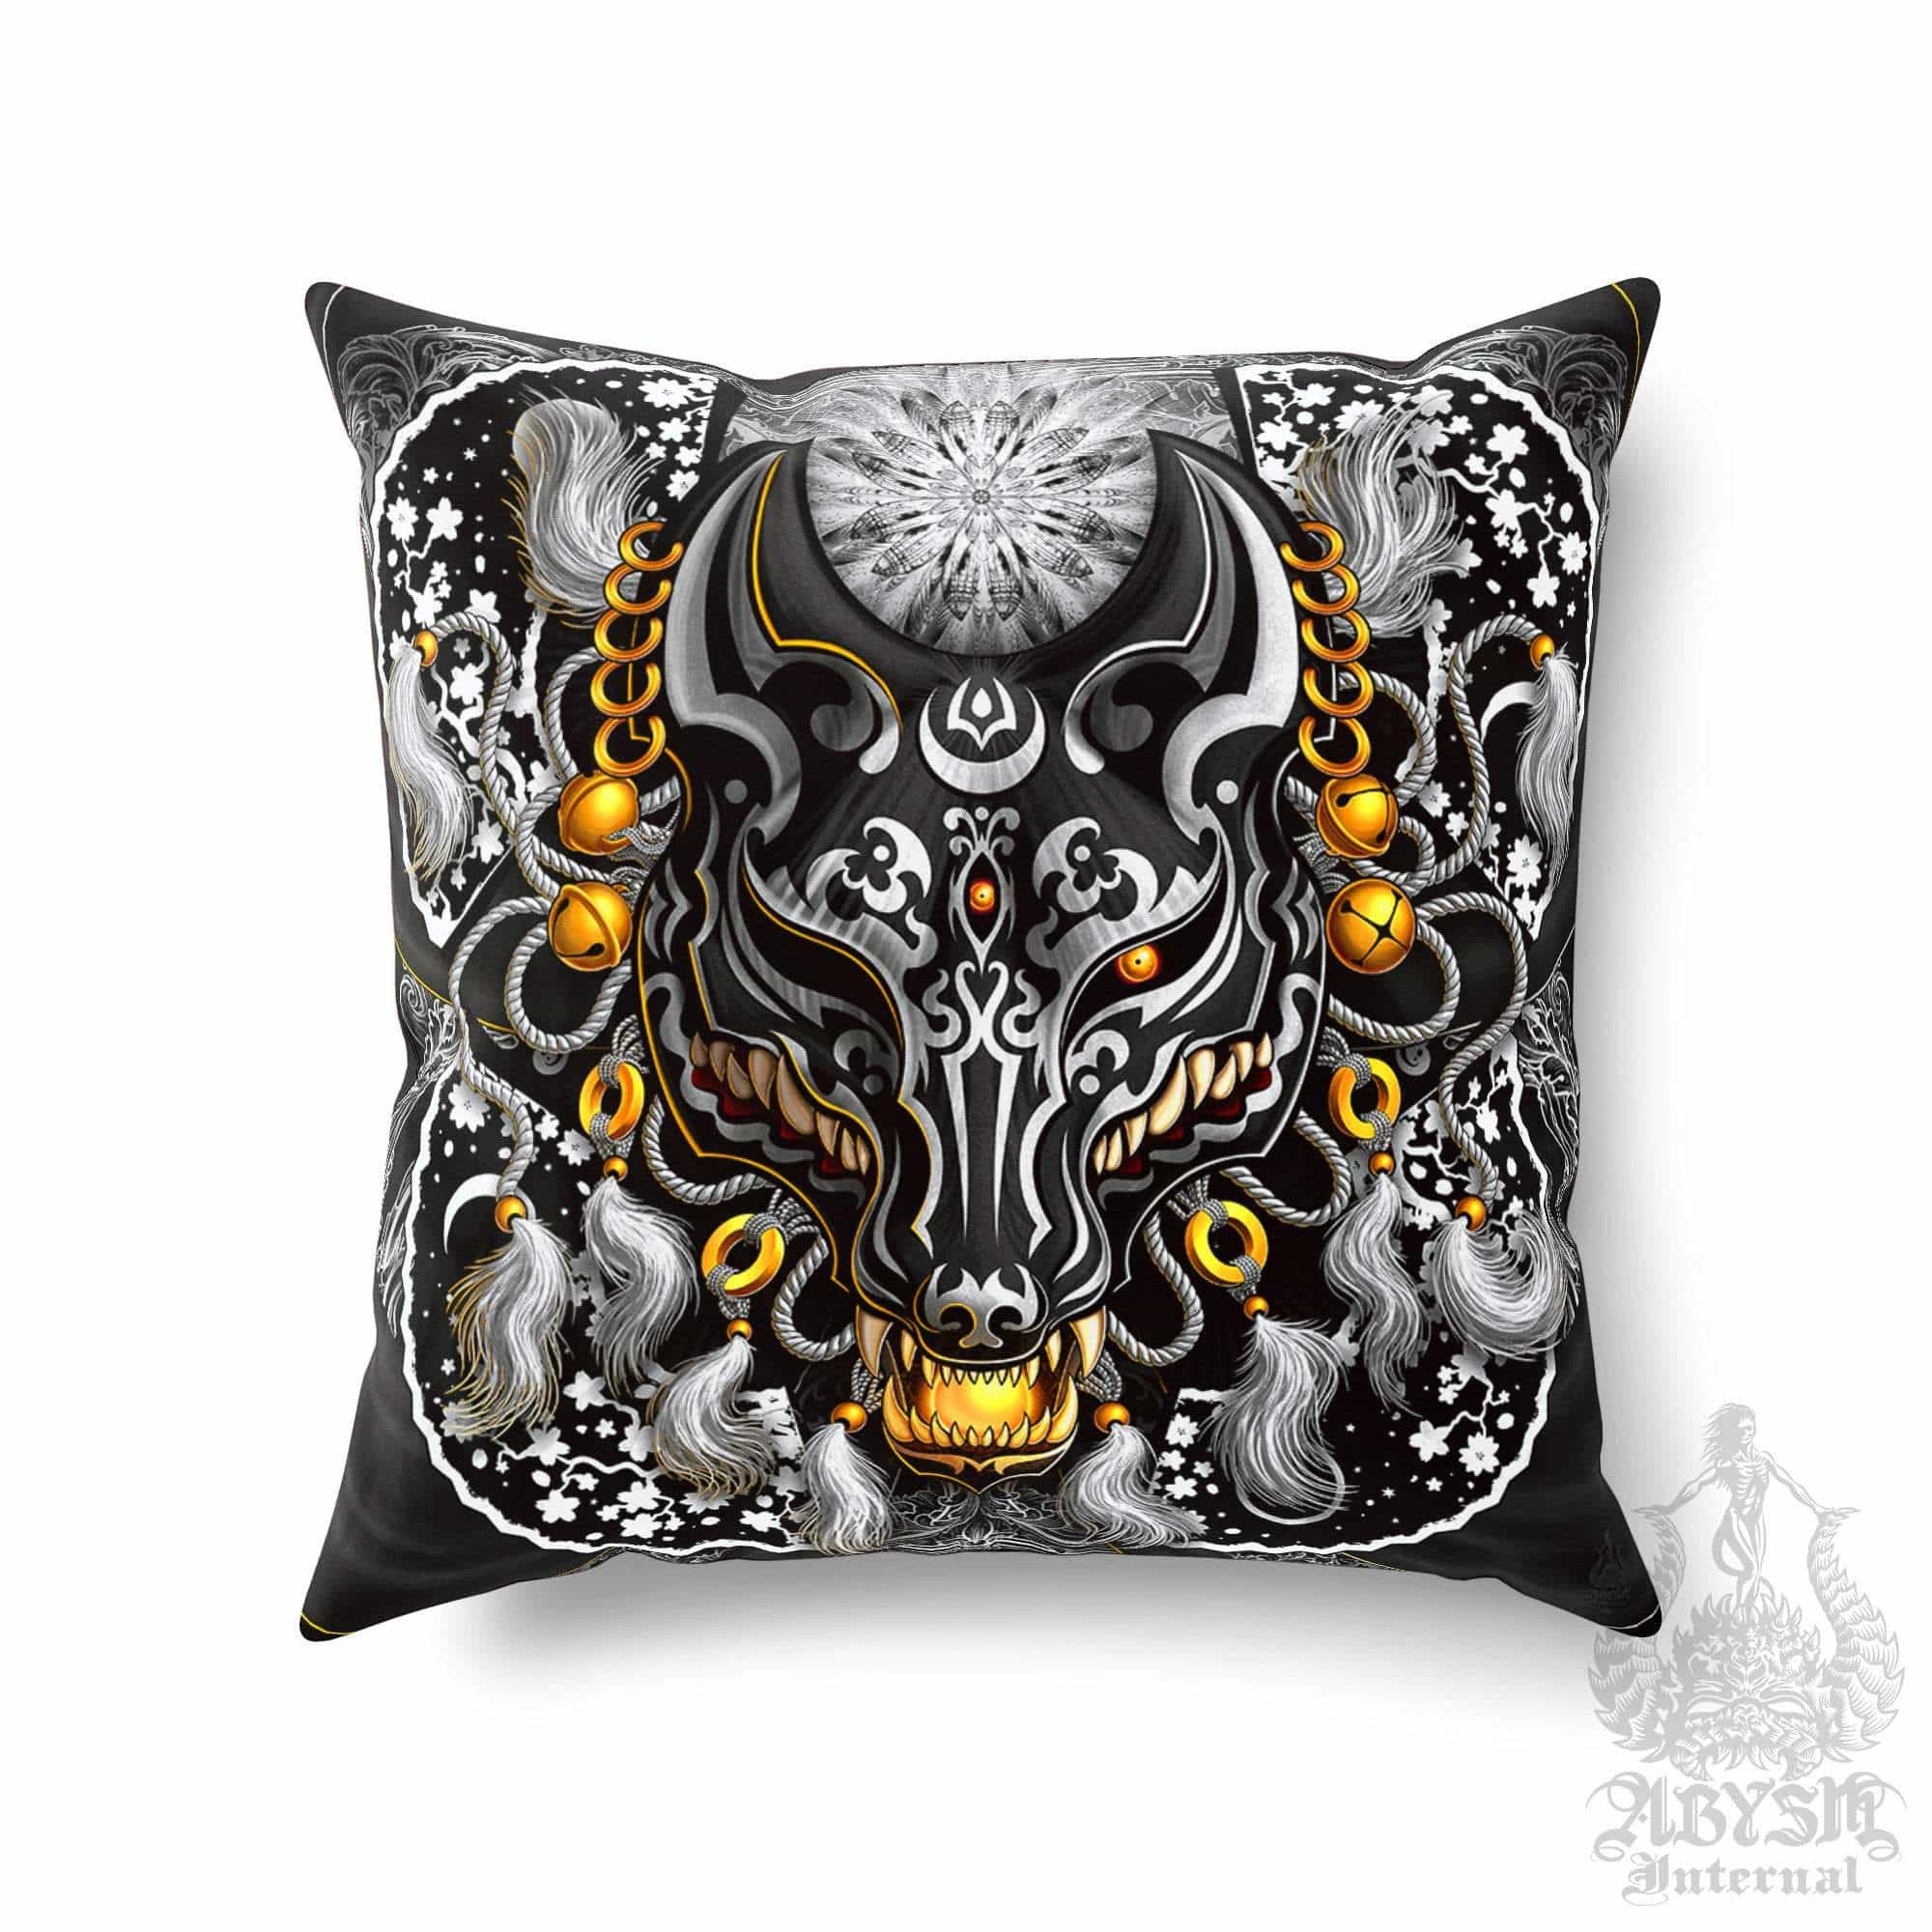 Kitsune Throw Pillow, Decorative Accent Cushion, Japanese Fox Mask, Okami, Anime and Gamer Room Decor, Alternative Home, Funky and Eclectic - Black & White - Abysm Internal